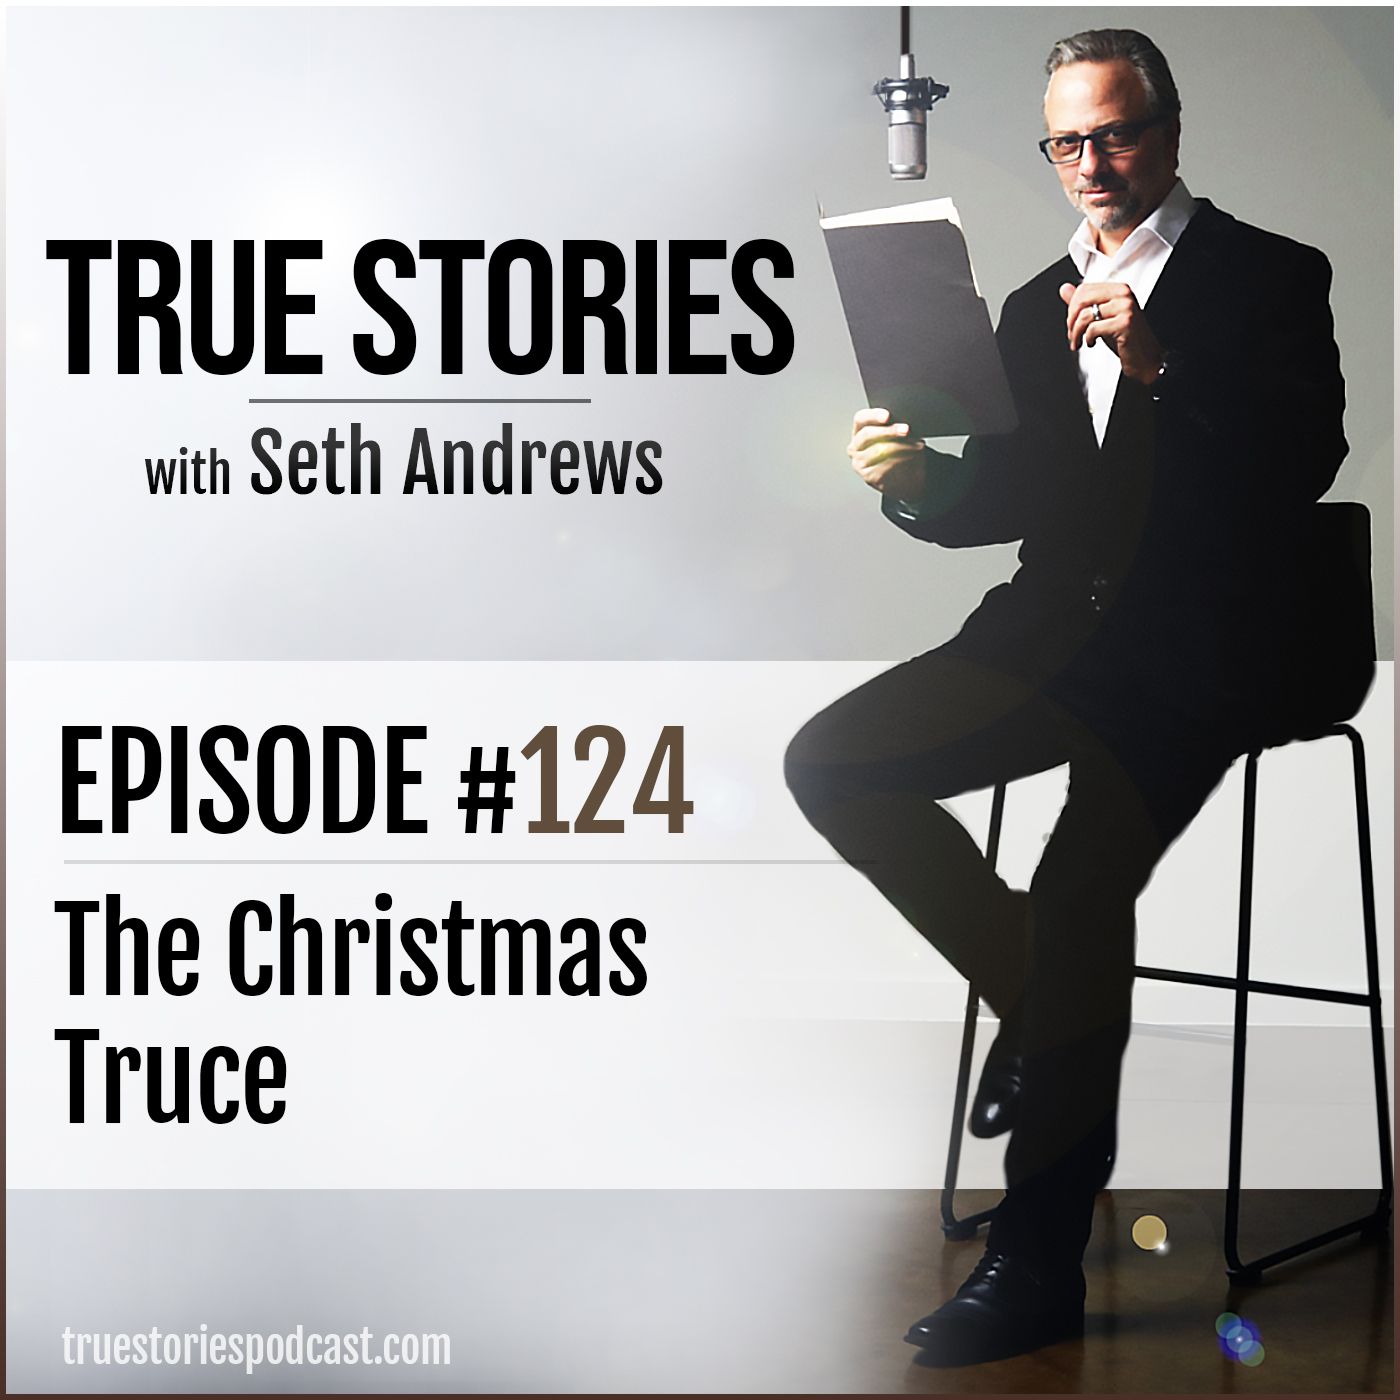 True Stories #124 - The Christmas Truce